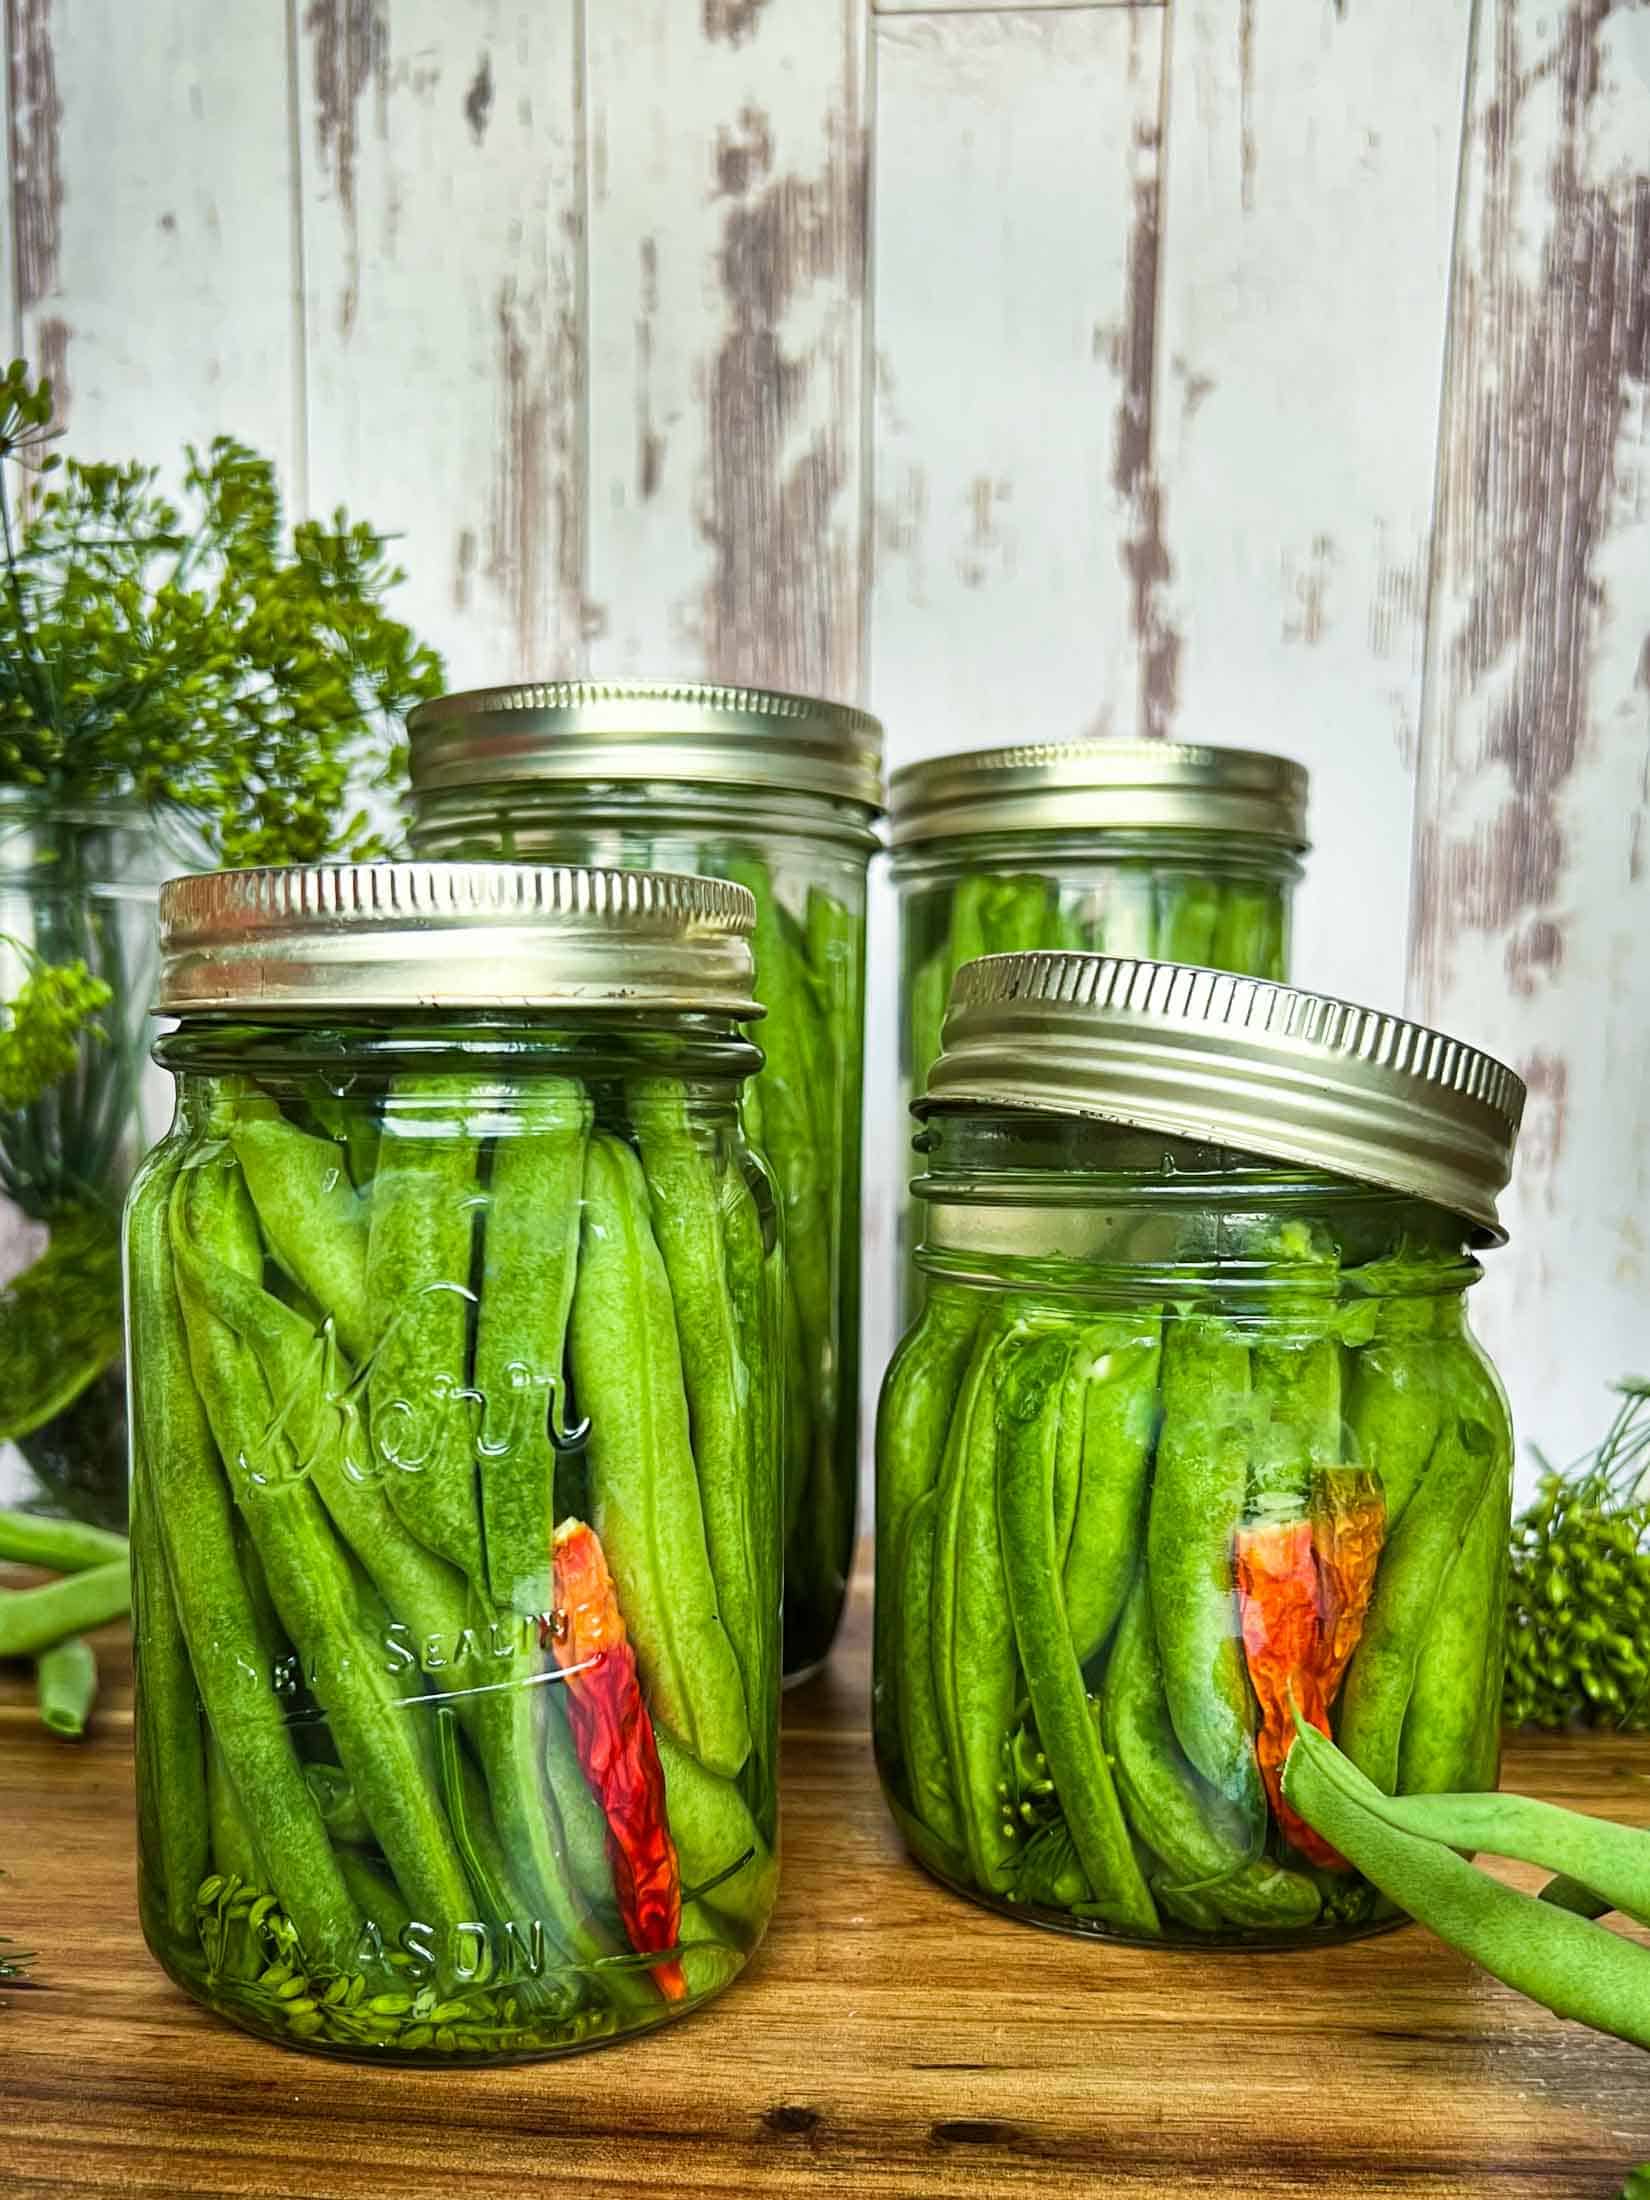 Fermented green beans in glass jars showing spicy chili peppers and dill in the foreground.